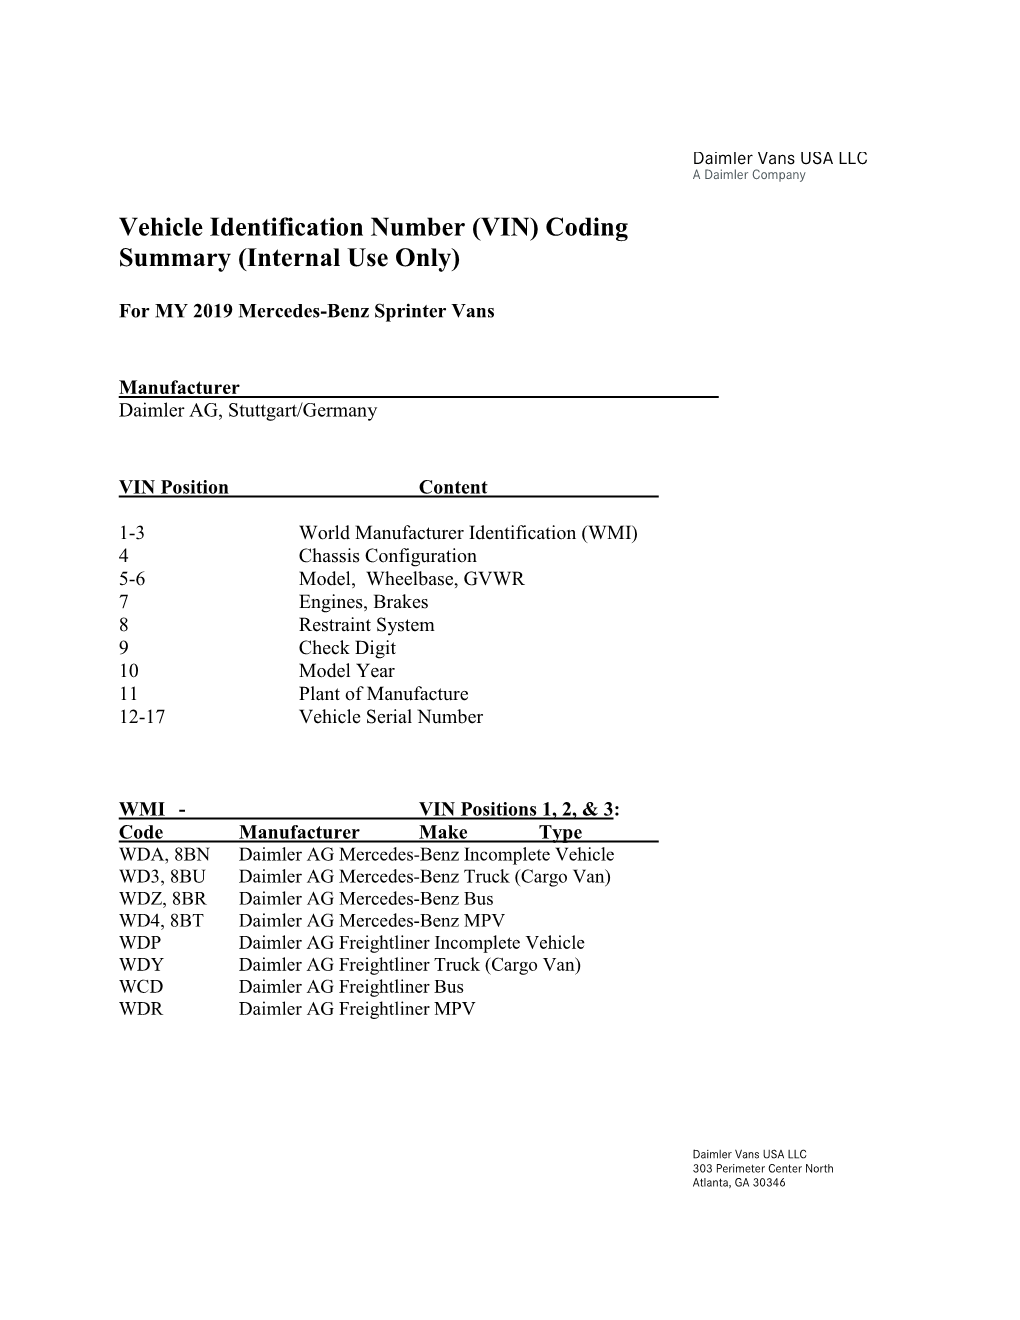 Vehicle Identification Number (VIN) Coding Summary (Internal Use Only)